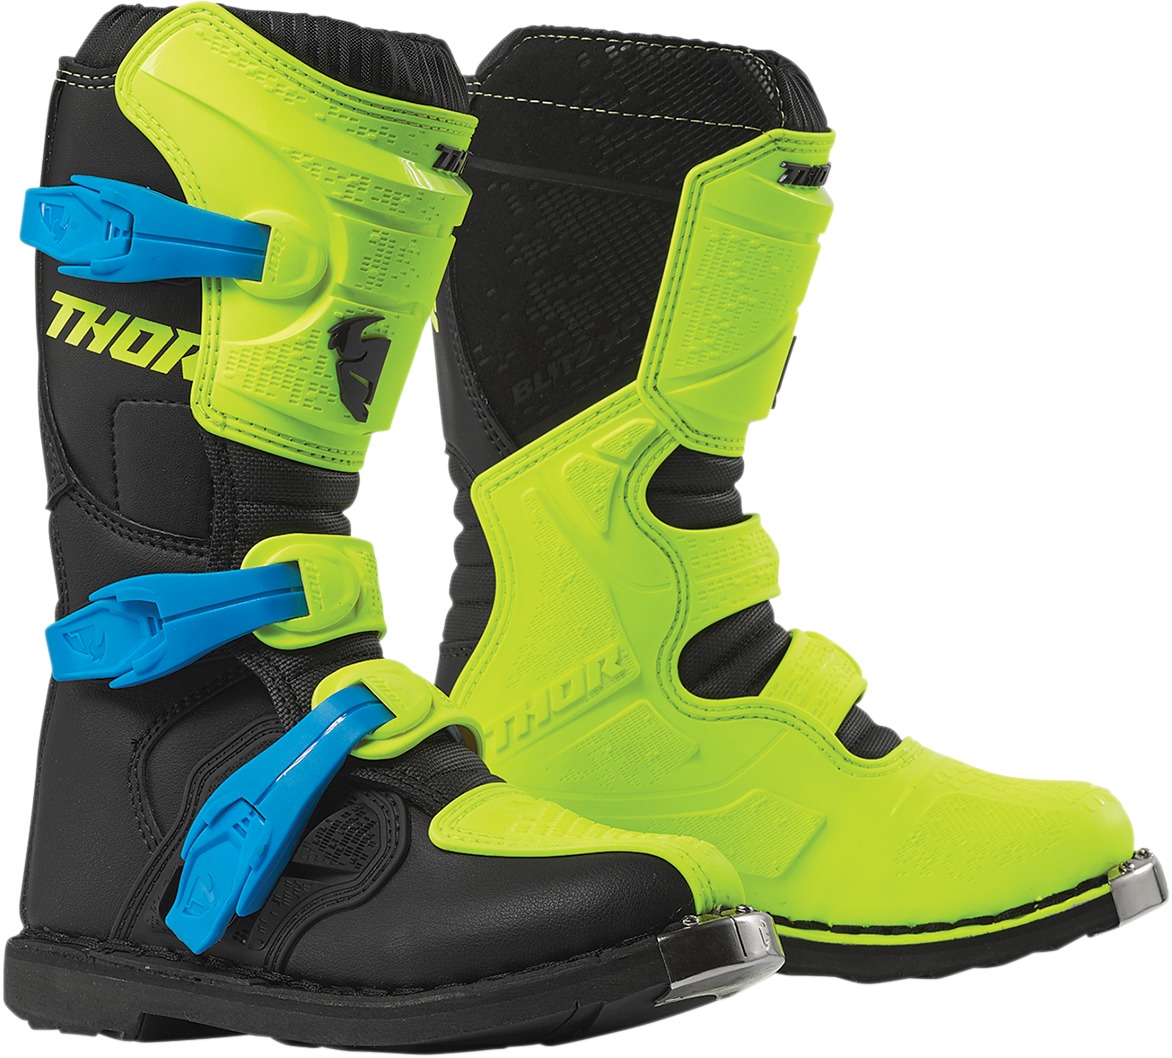 Blitz XP Dirt Bike Boots - Black & Flo Green MX Sole US Size Youth 07 - Click Image to Close